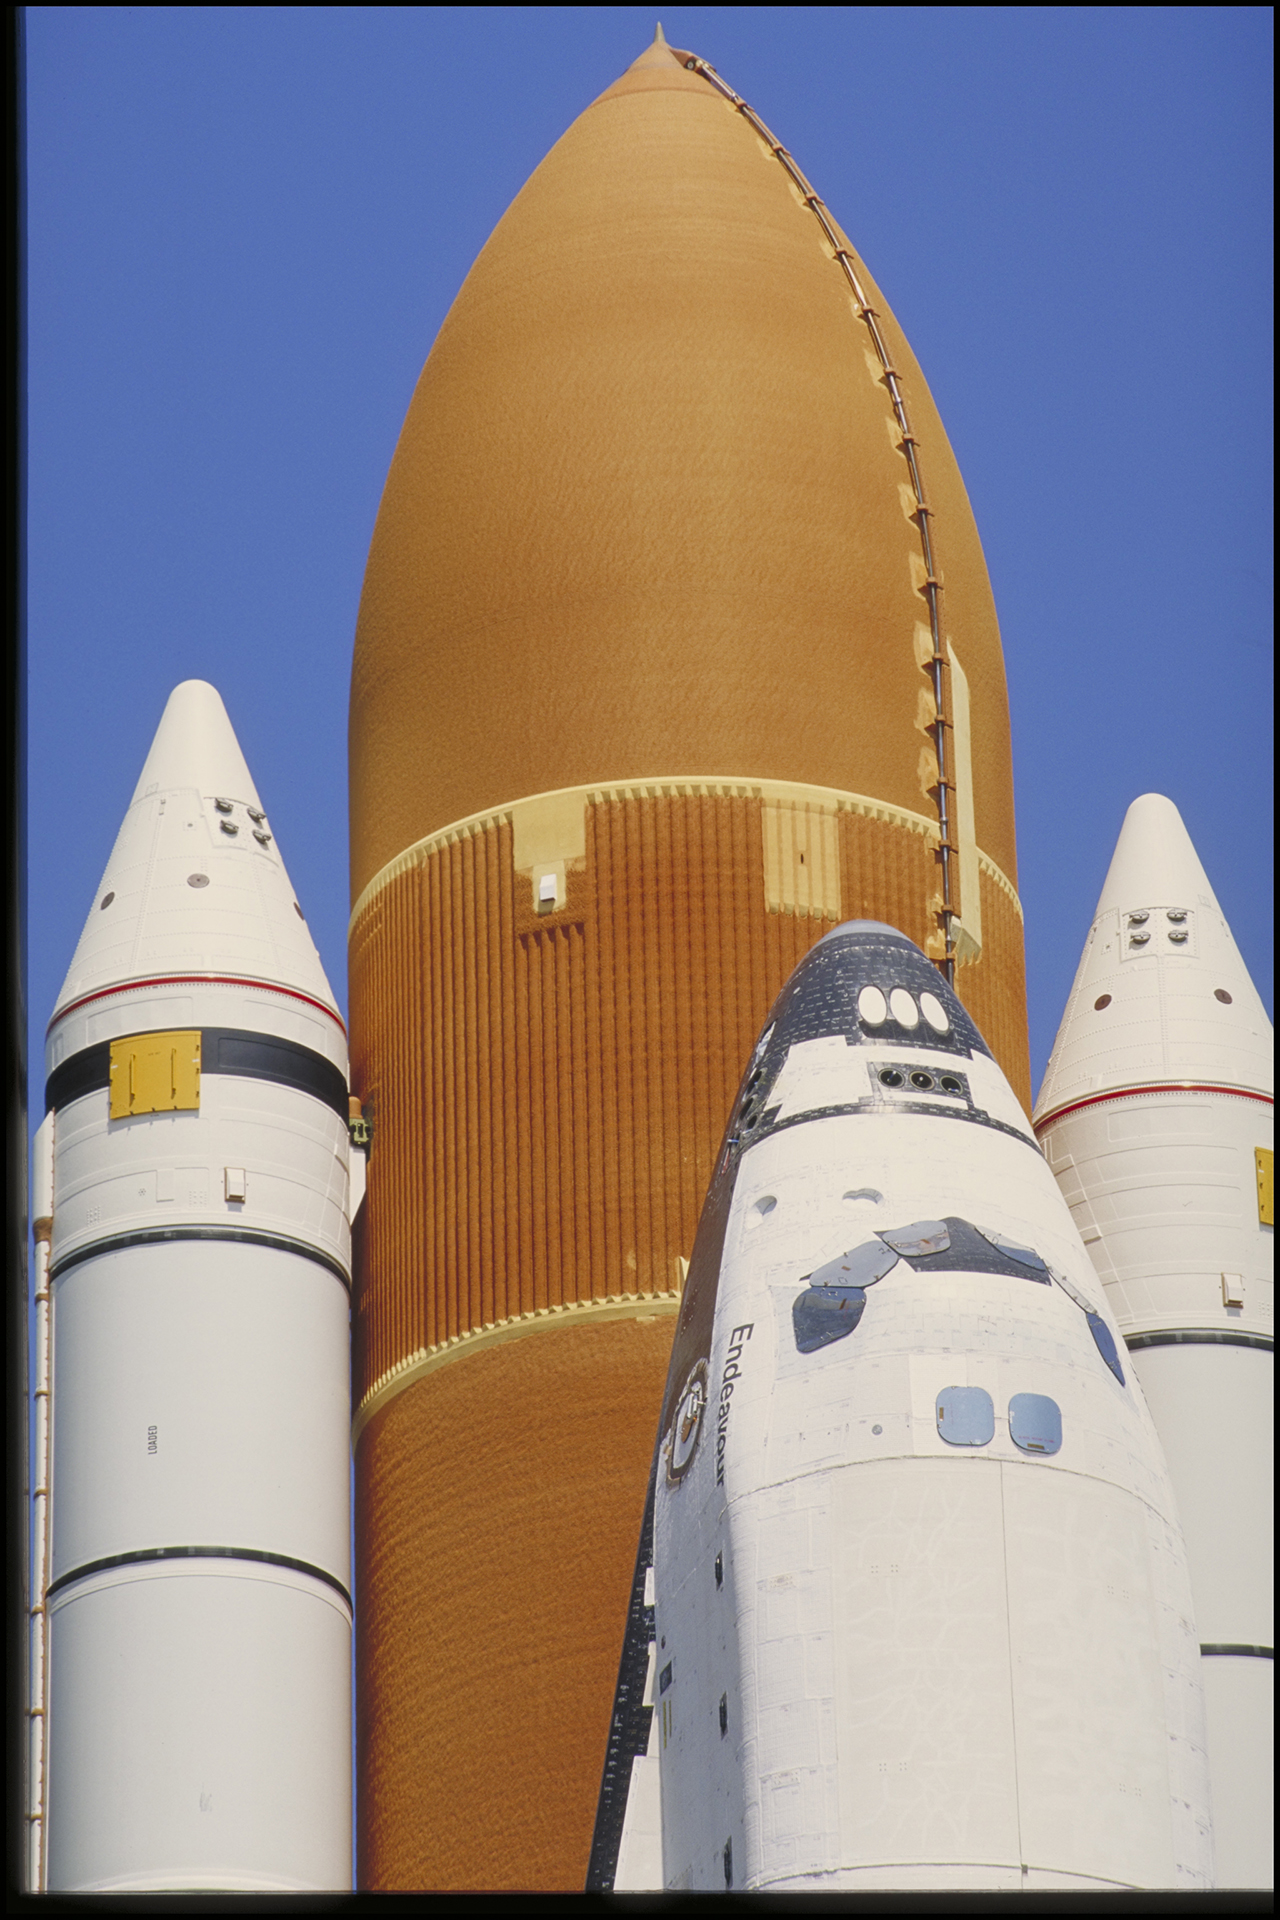 Powering the Space Shuttle